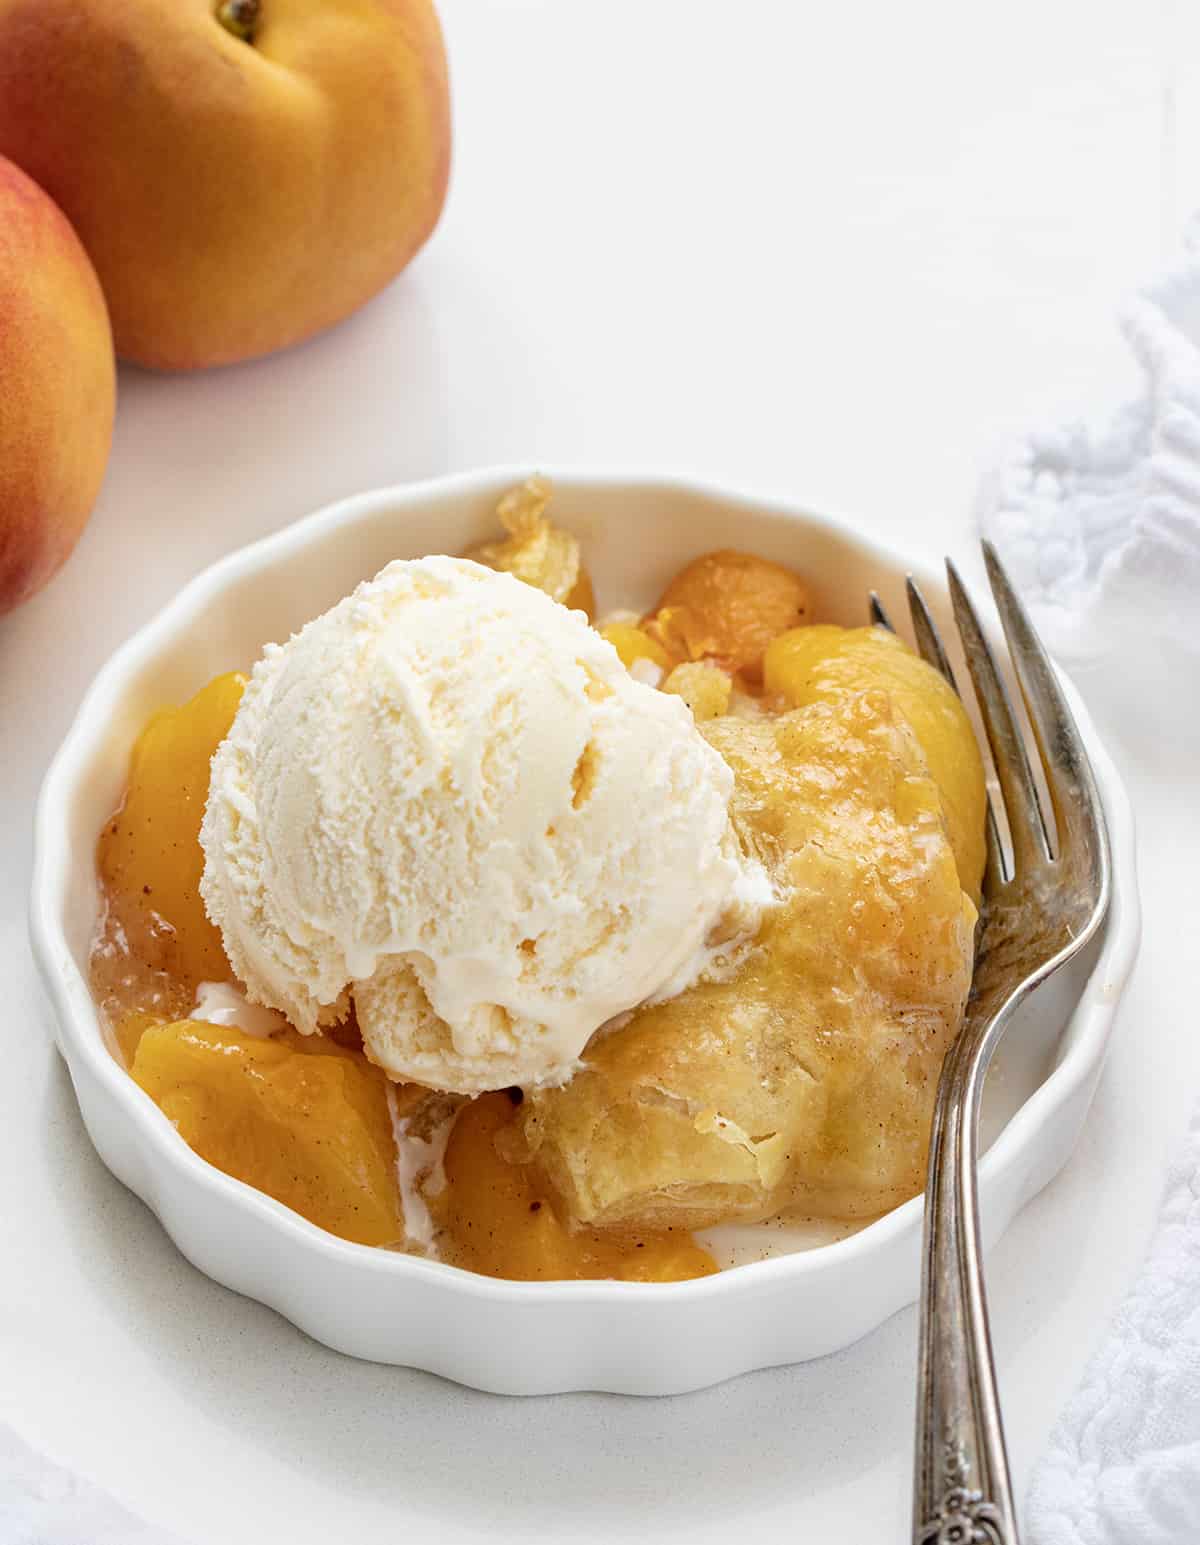 One Bowl of Peach Puff Pastry Bake on a White Counter with Peaches and a Fork and a Scoop of Vanilla Ice Cream.